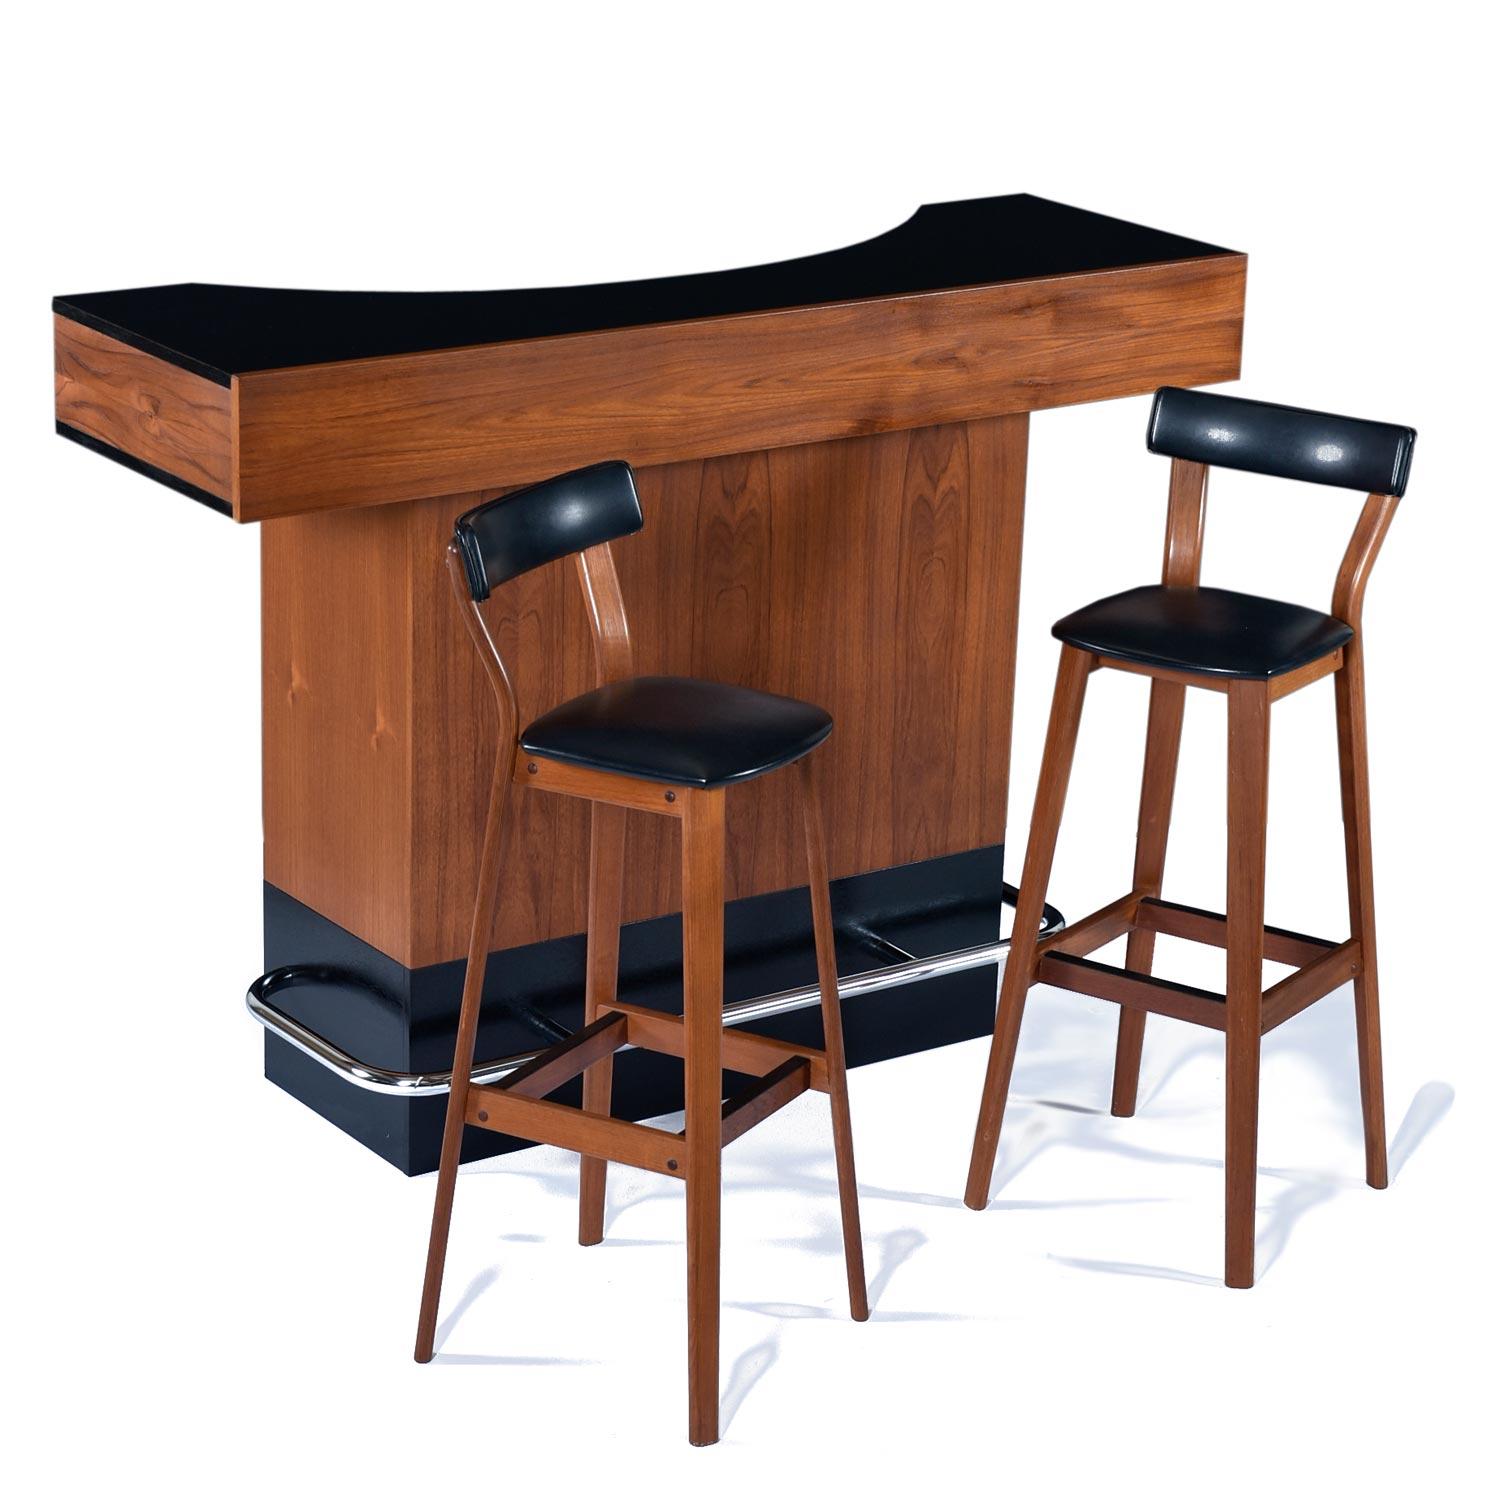 Exceptional free standing Danish teak bar complete with a pair of Tarm Stole bar stools. The outstanding dry bar resembles, but exceeds, Erik Buch’s popular design. This vintage 1960s bar features an ample counter top surface. The easy to maintain